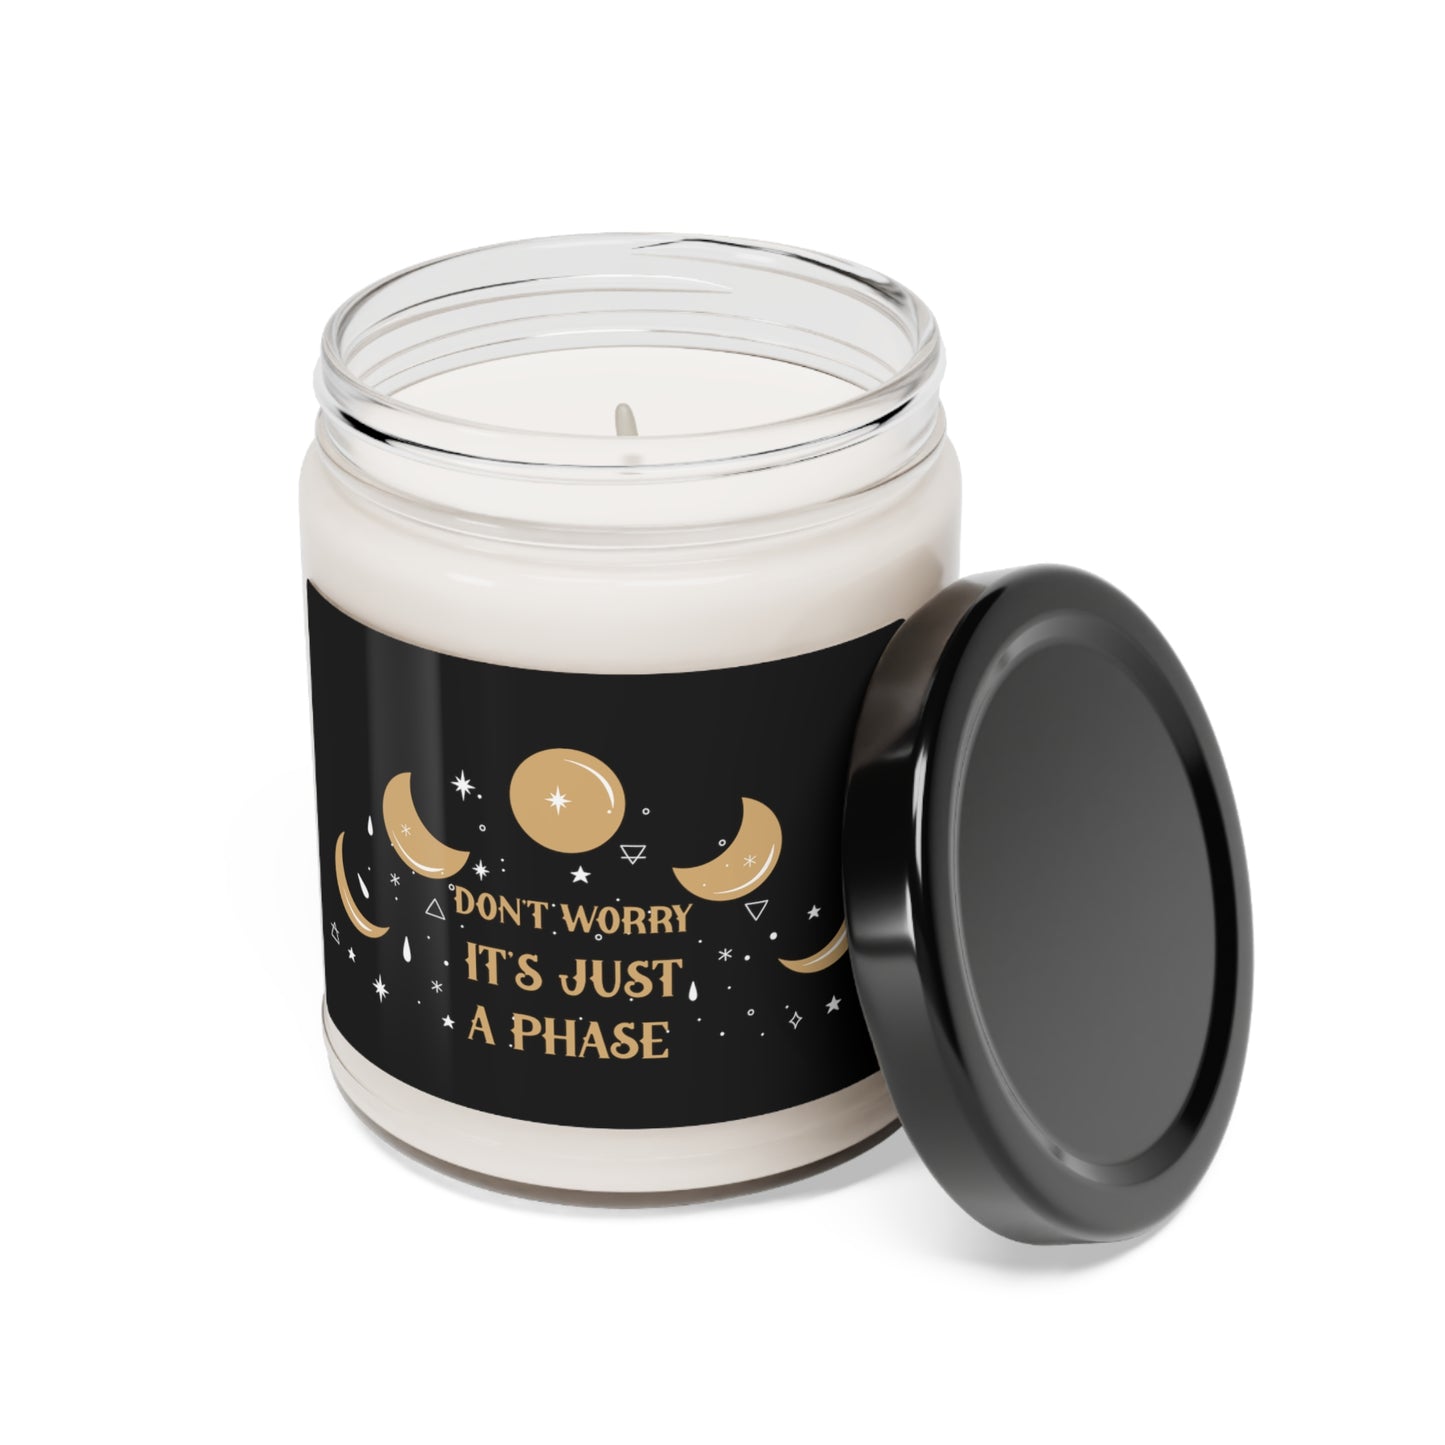 Its Just a Phase Scented Soy Candle, 9oz